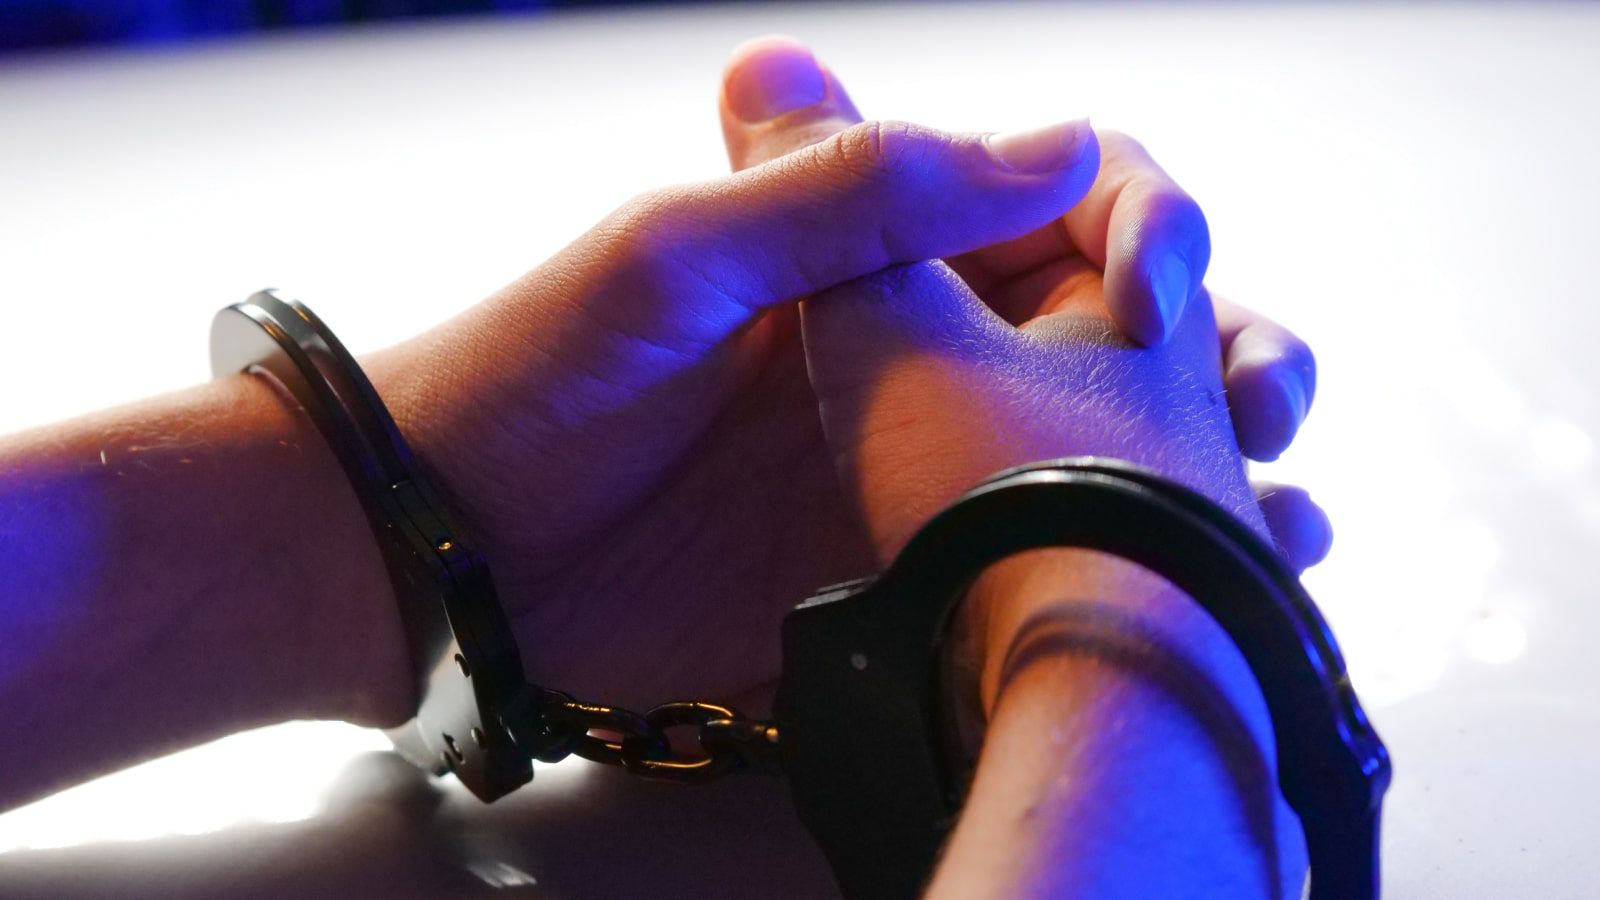 A pair of hands in handcuffs.